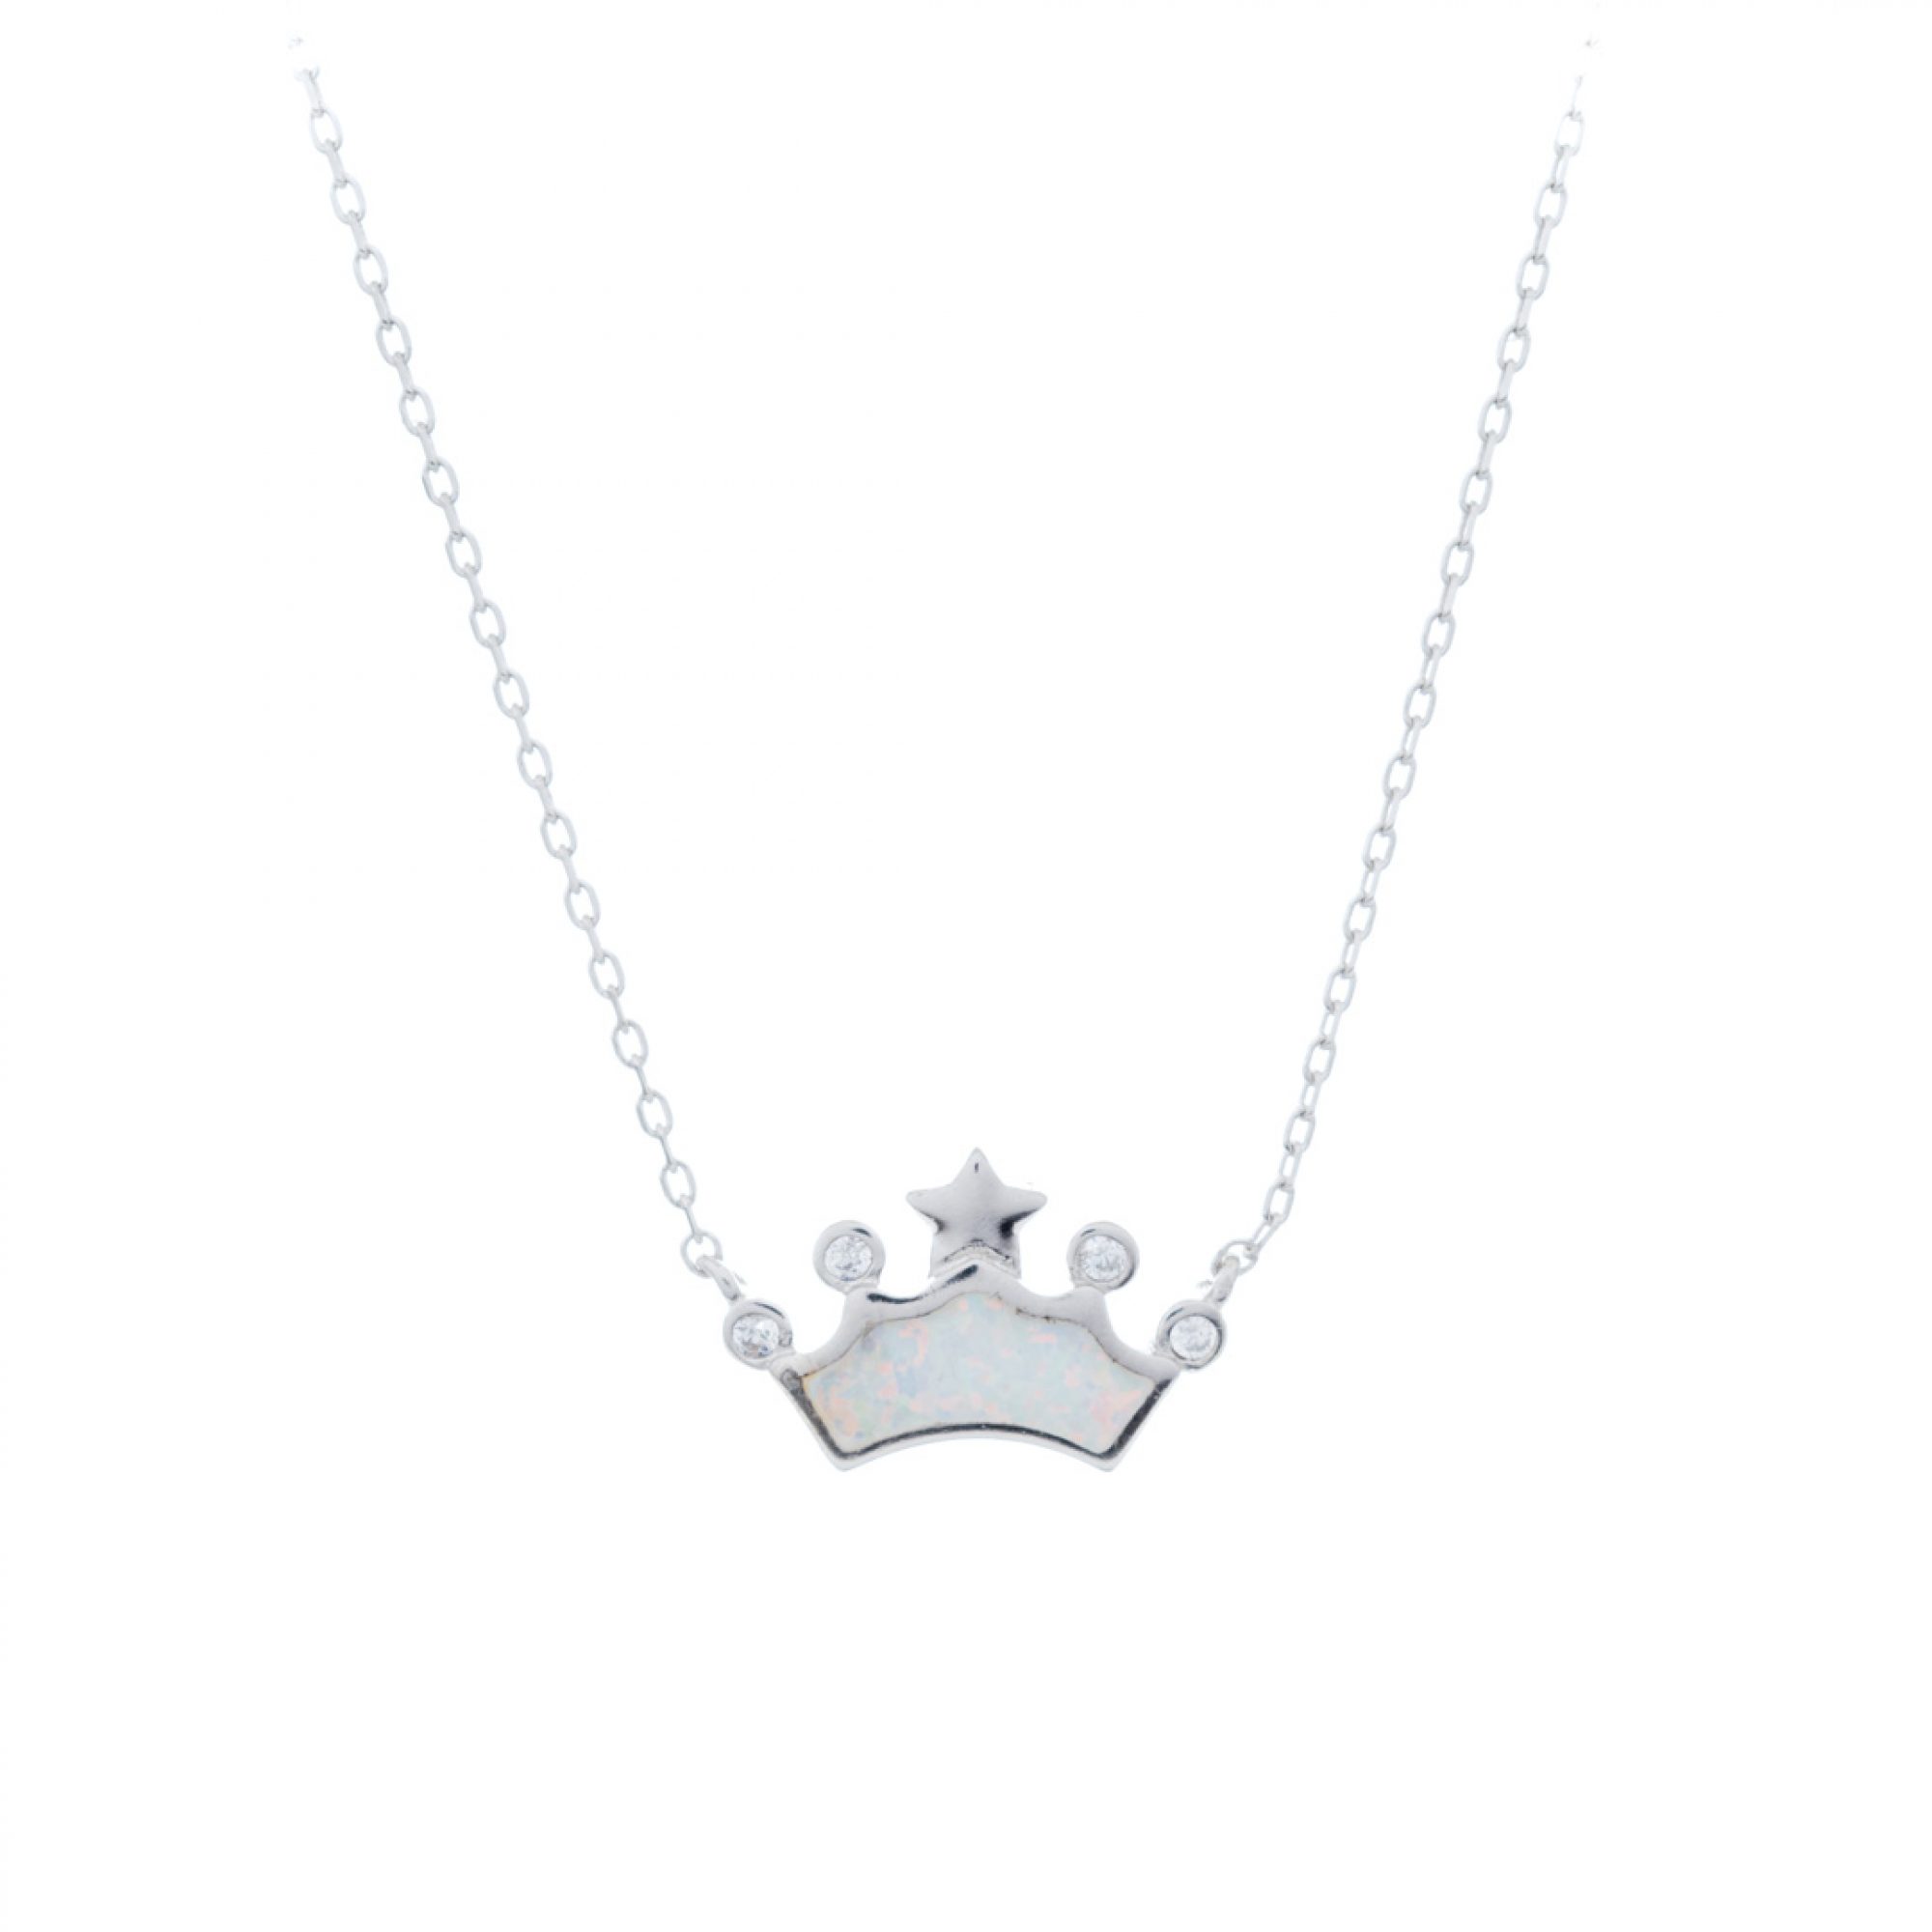 White opal crown necklace